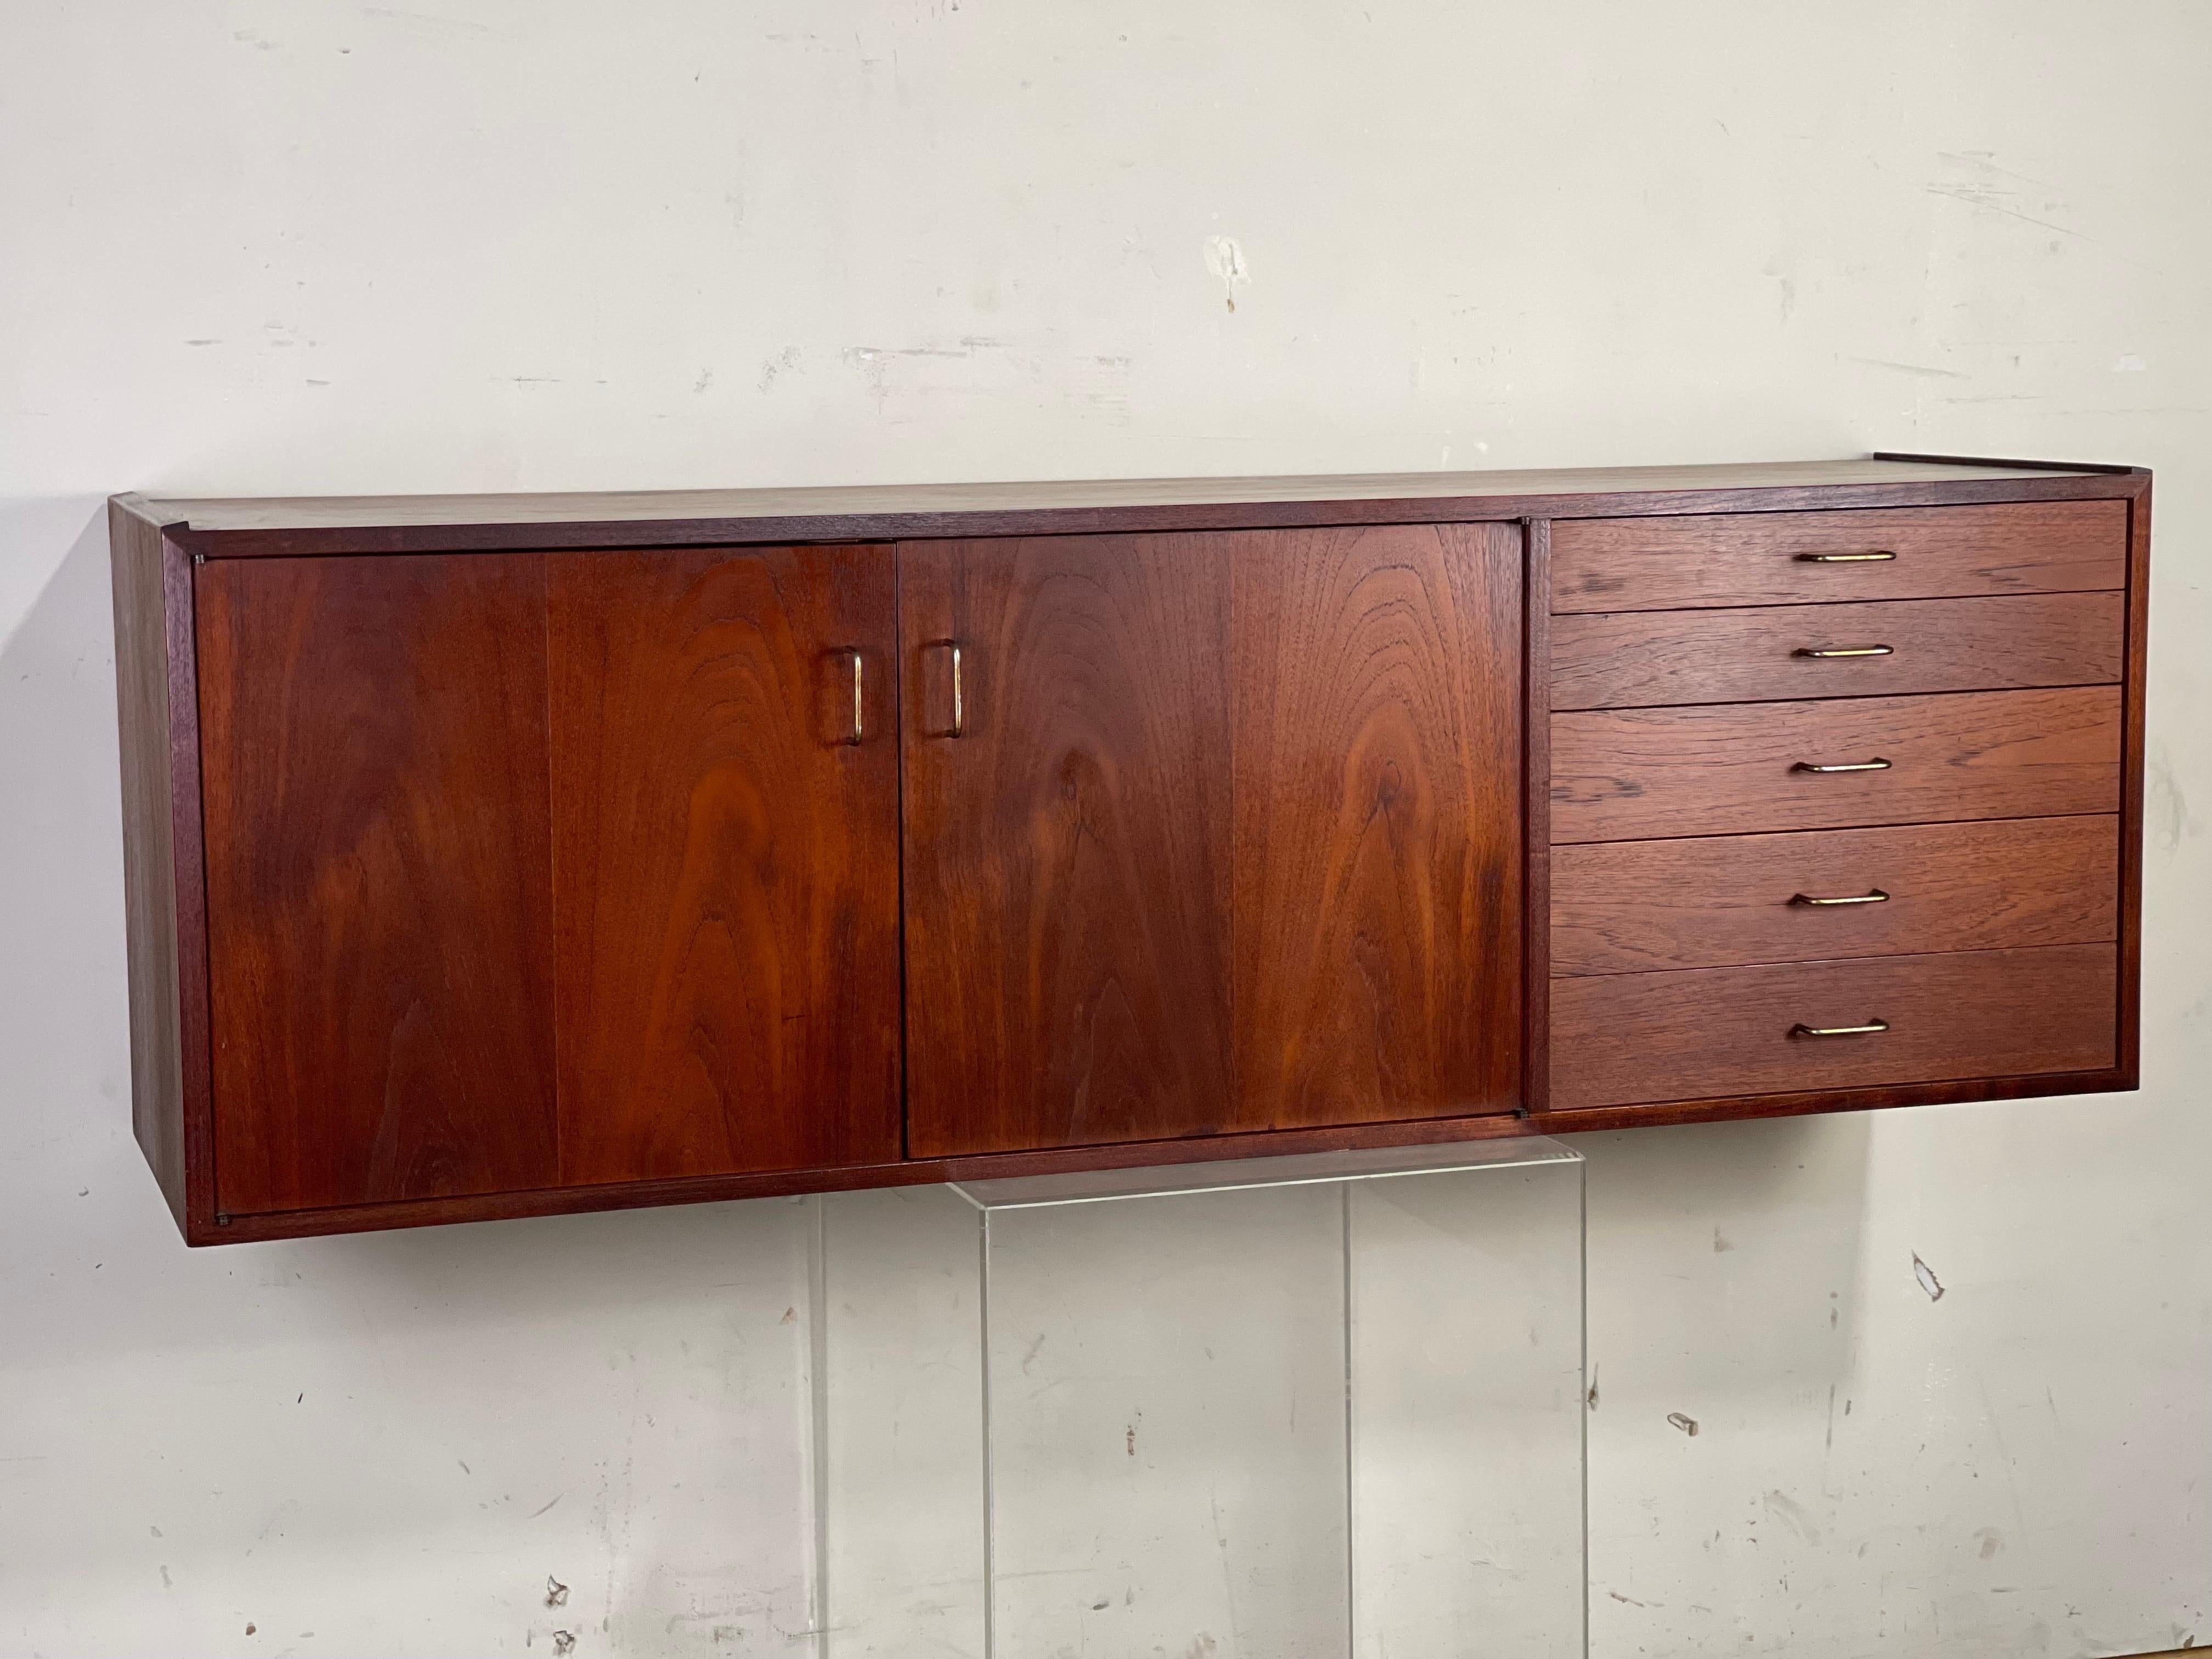 Excellent custom wall mounted media cabinet attributed to Jens Risom; 1950's. In clean original condition - the oiled walnut book matched grain doors and drawer fronts carriy years of patina that make this walnut look like nicely aged. Moveable